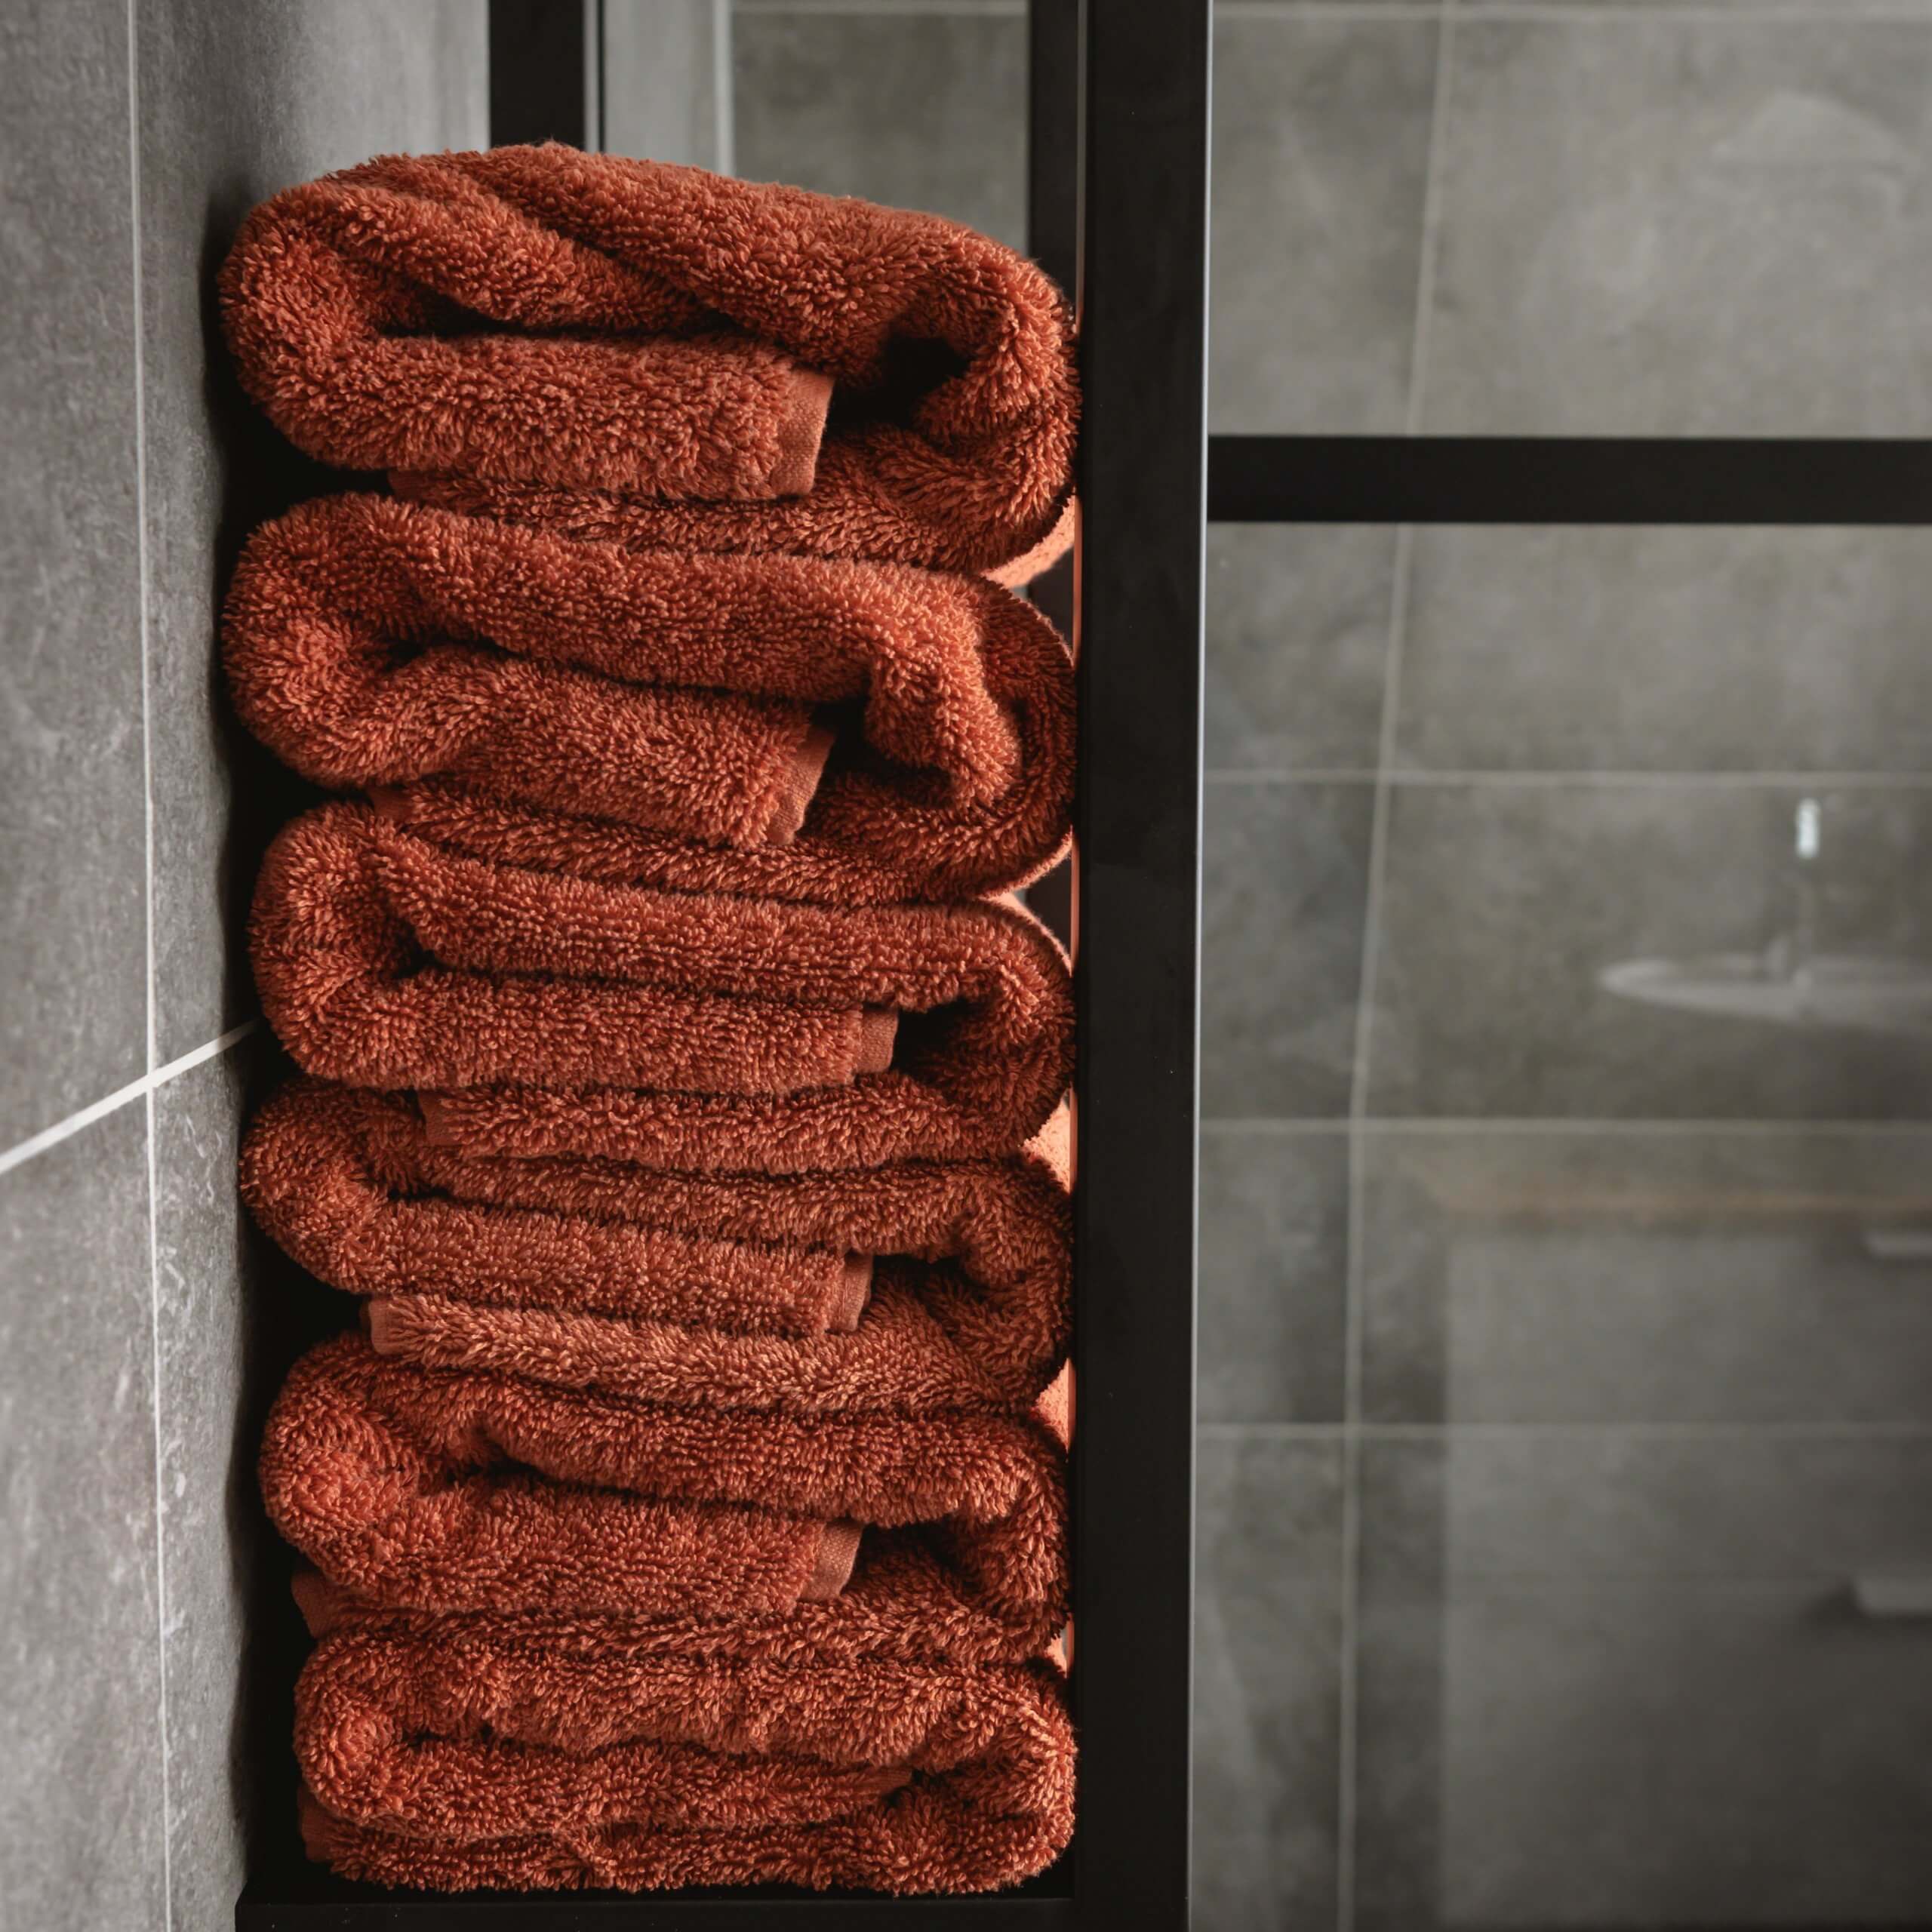 Well-presented towels can be great accent pieces for a bathroom. 